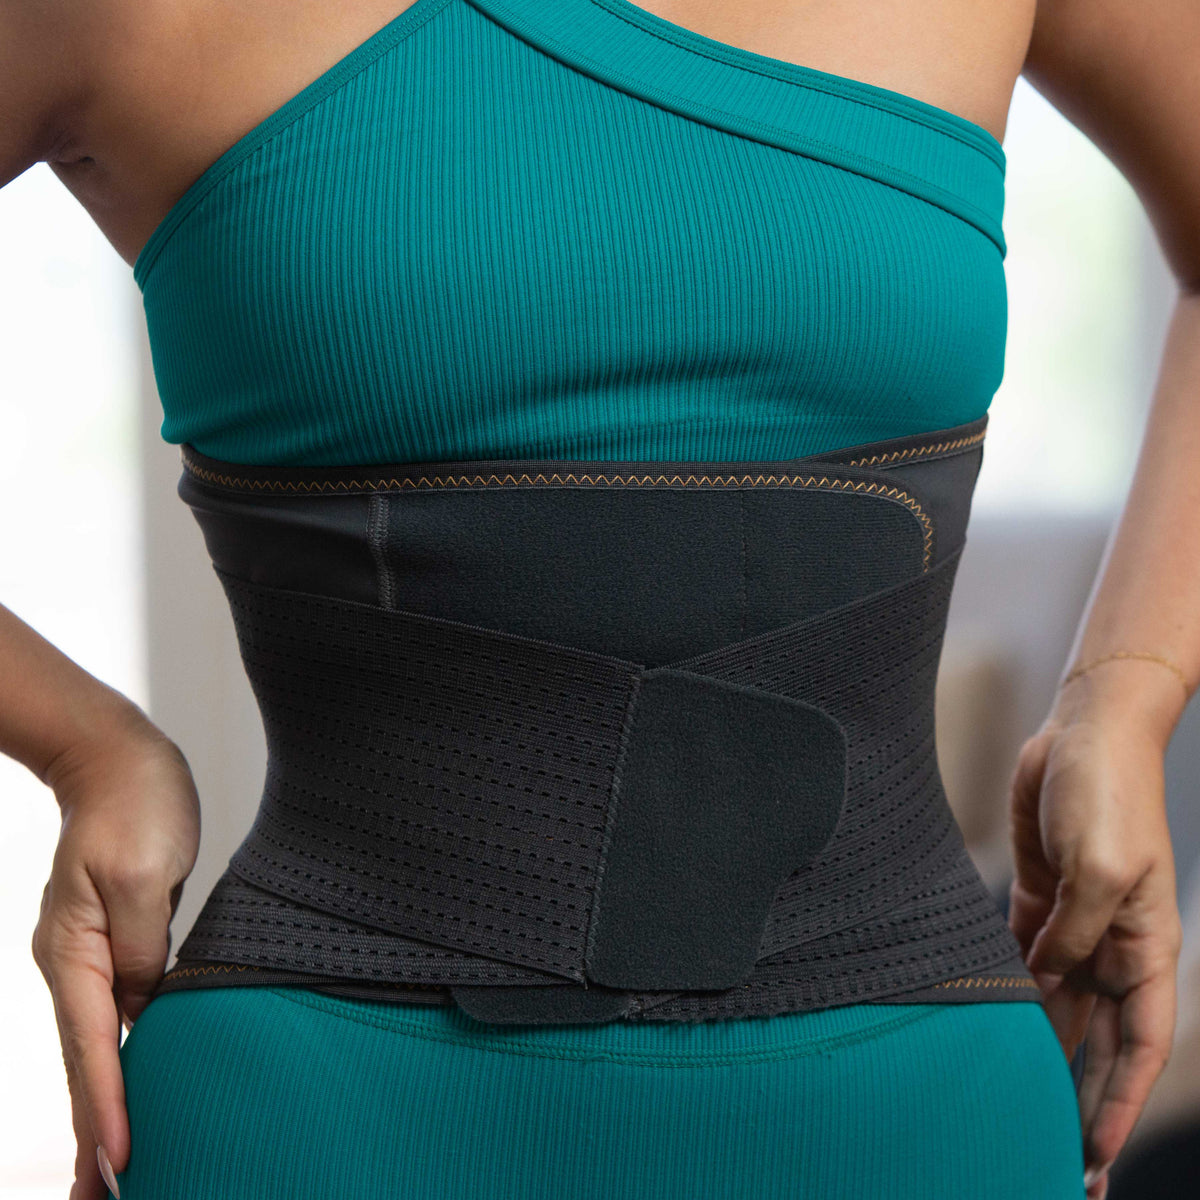  Customer reviews: CORE Shaper, Waist Trainer, Abs & Back  Belt - Best Lumbar Support for Sports or Everyday - Dual Compression Wrap  for Weight Loss or Sweat Sauna for Men &